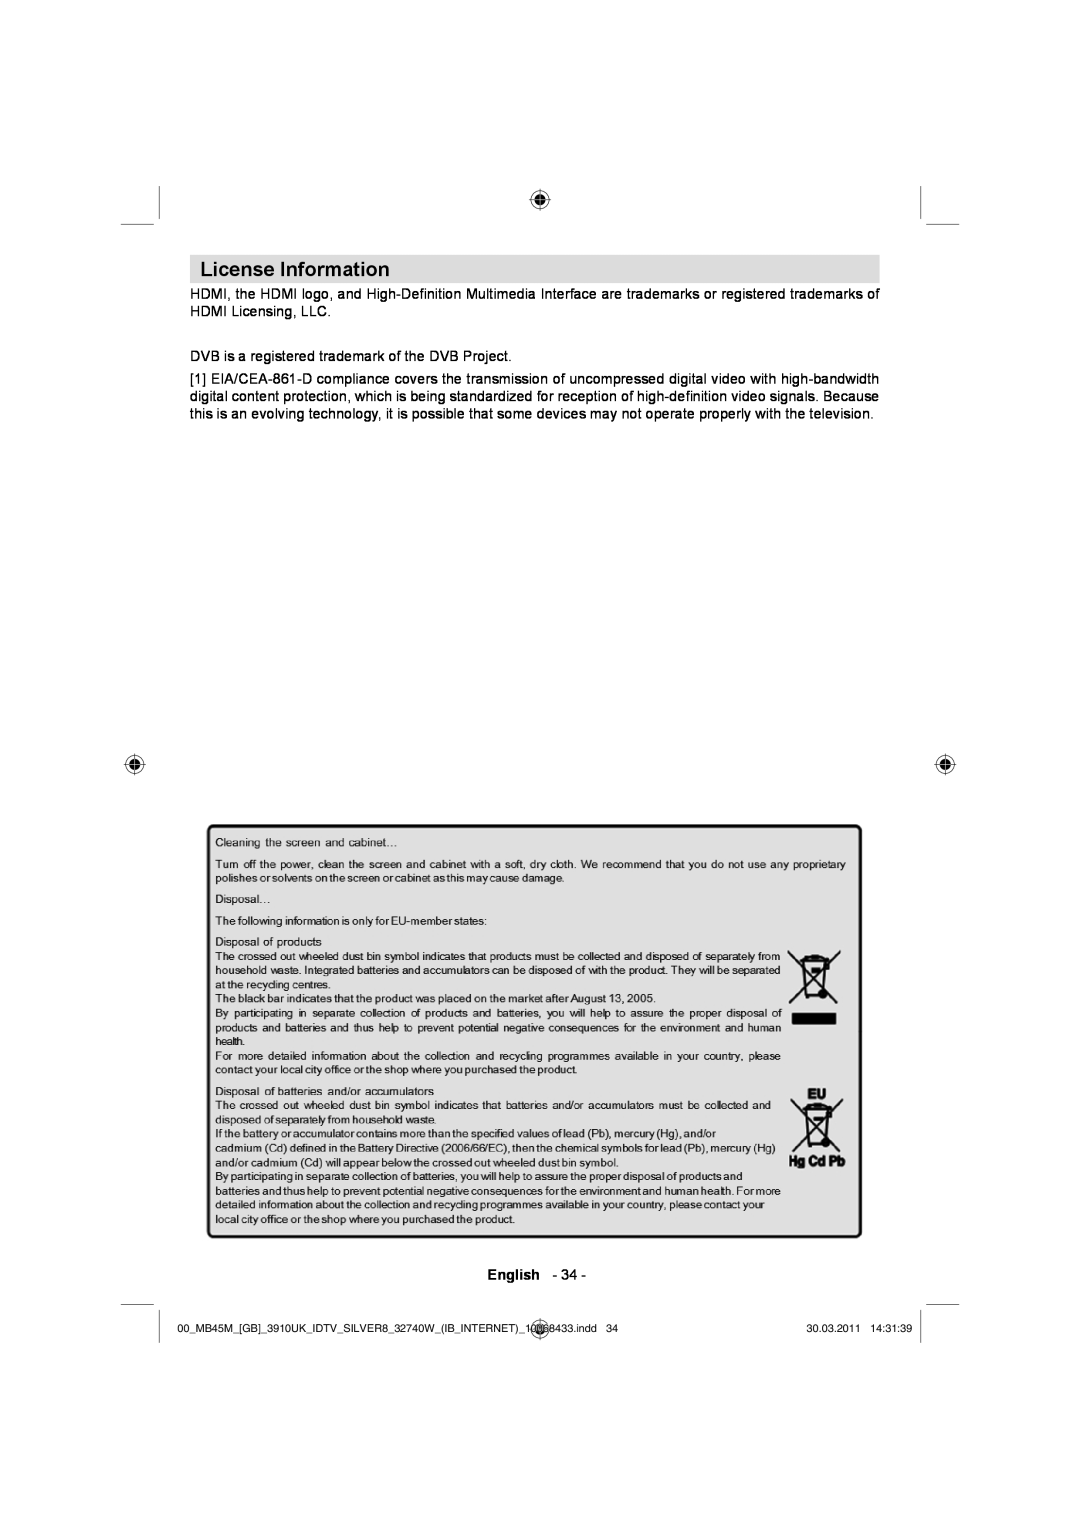 Toshiba 32BV500B owner manual License Information, DVB is a registered trademark of the DVB Project 